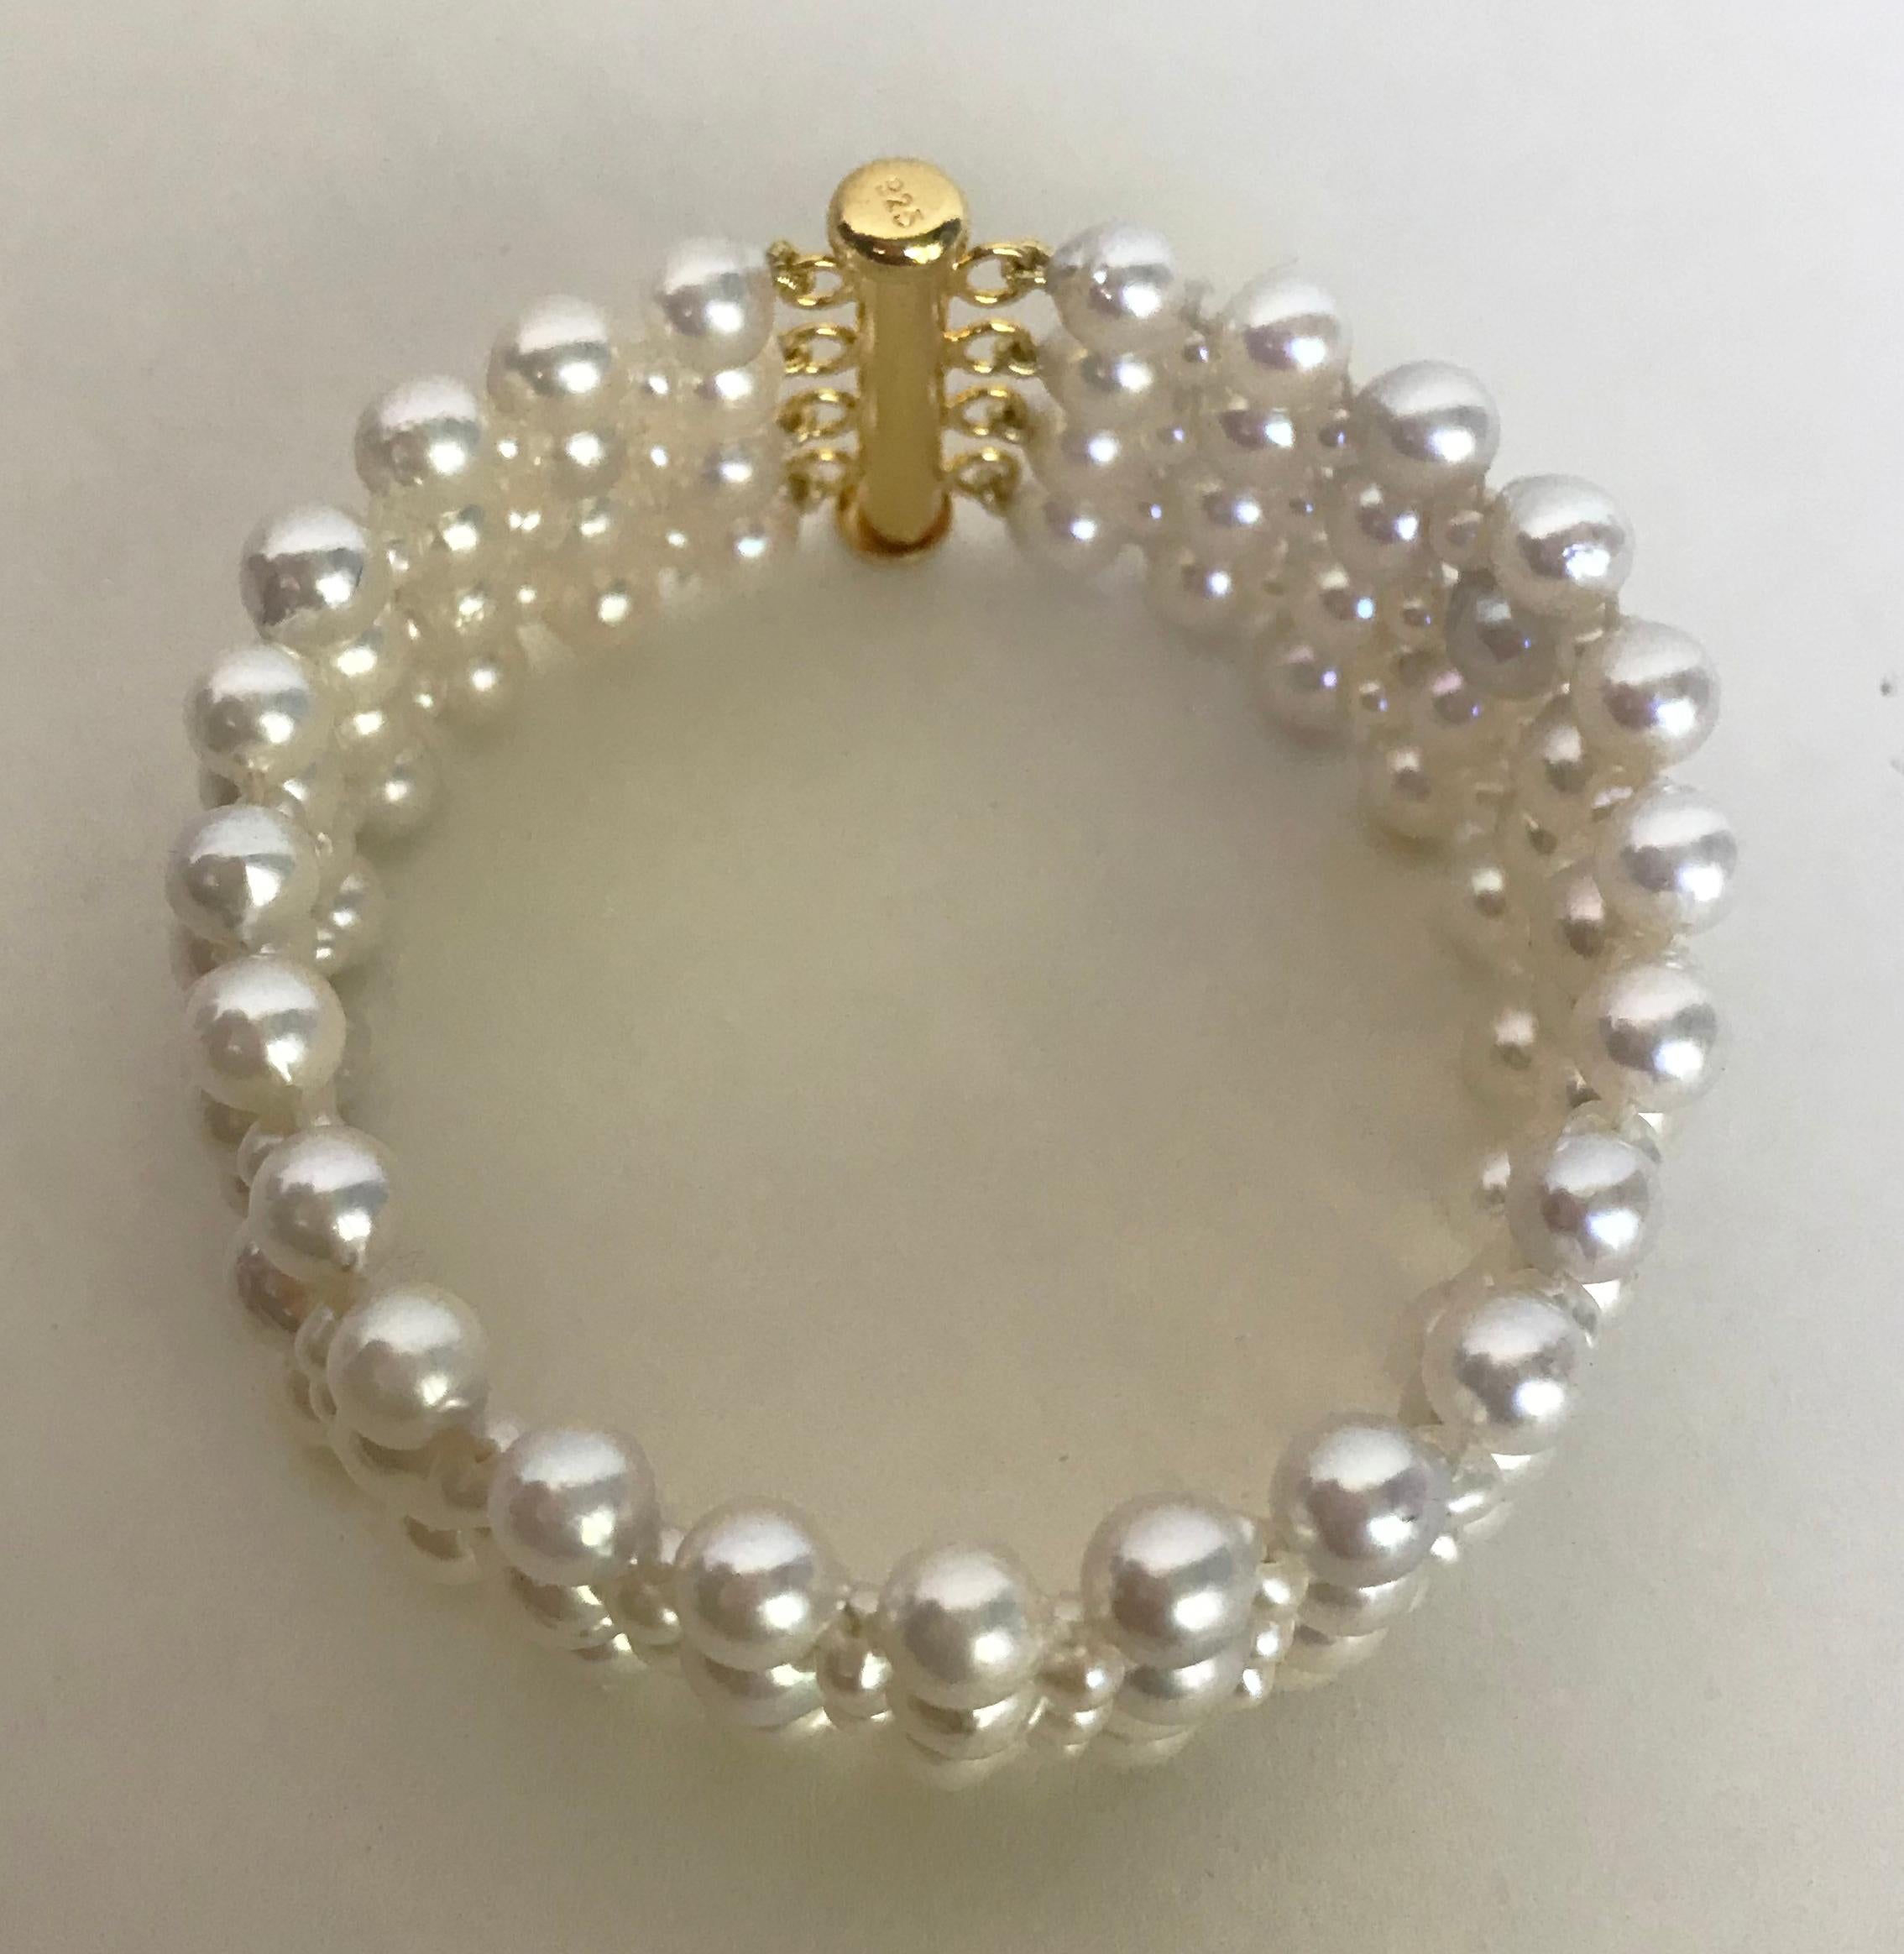 Women's Marina J. Woven Pearl Bracelet with 14 Karat Yellow Gold Plated Clasp